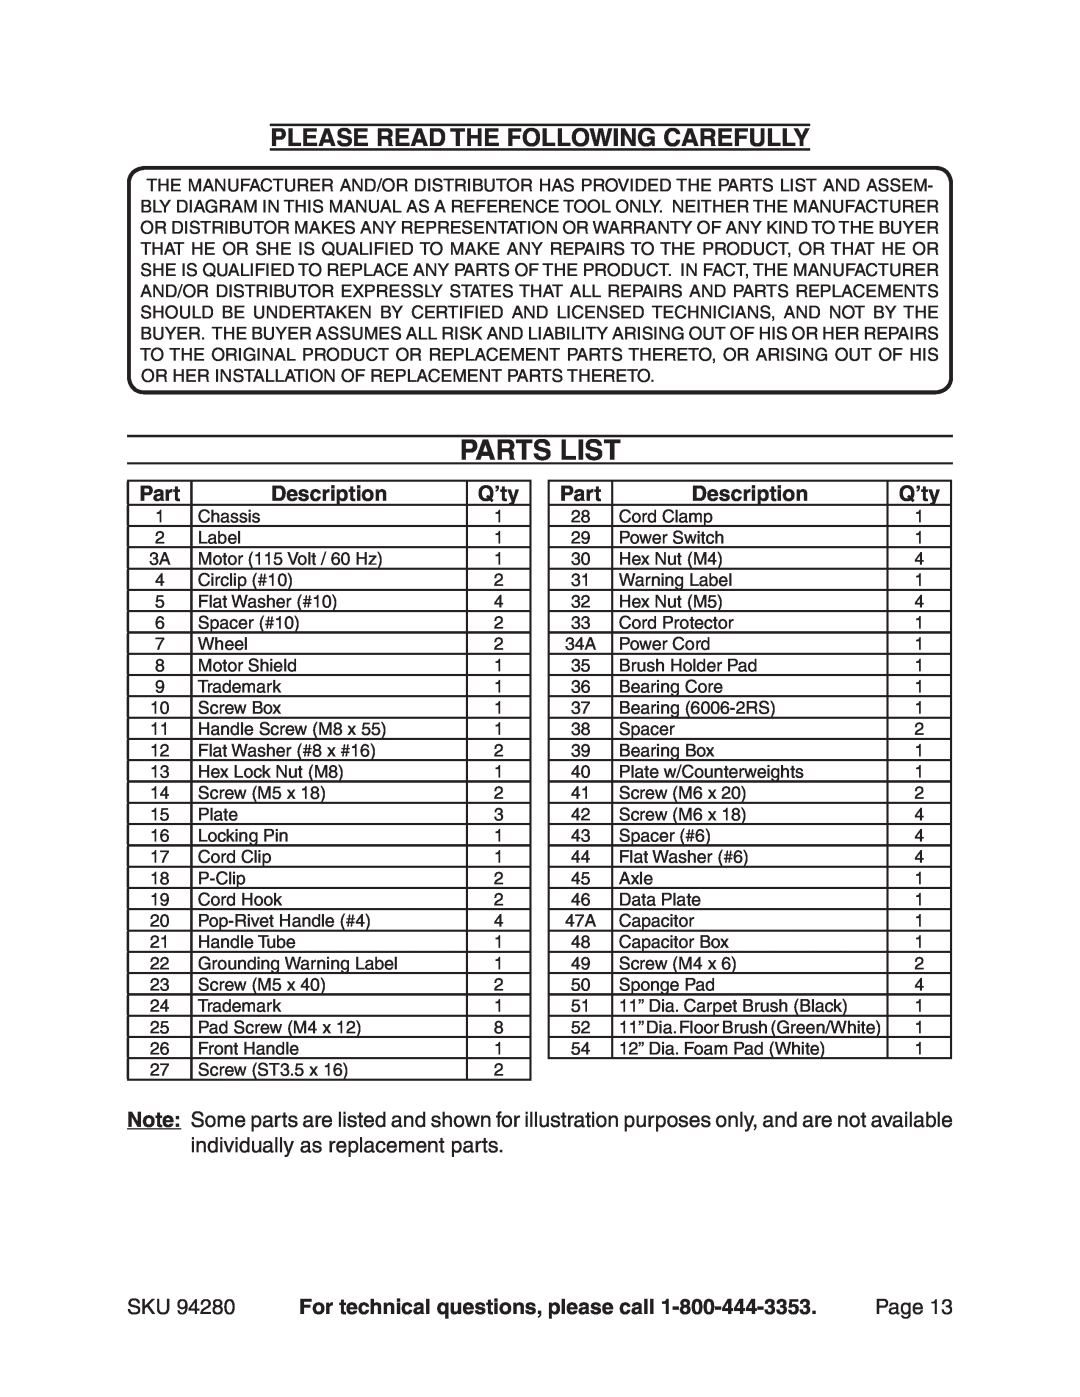 Harbor Freight Tools 94280 manual Parts List, Please Read The Following Carefully, Description, Q’ty, Page 